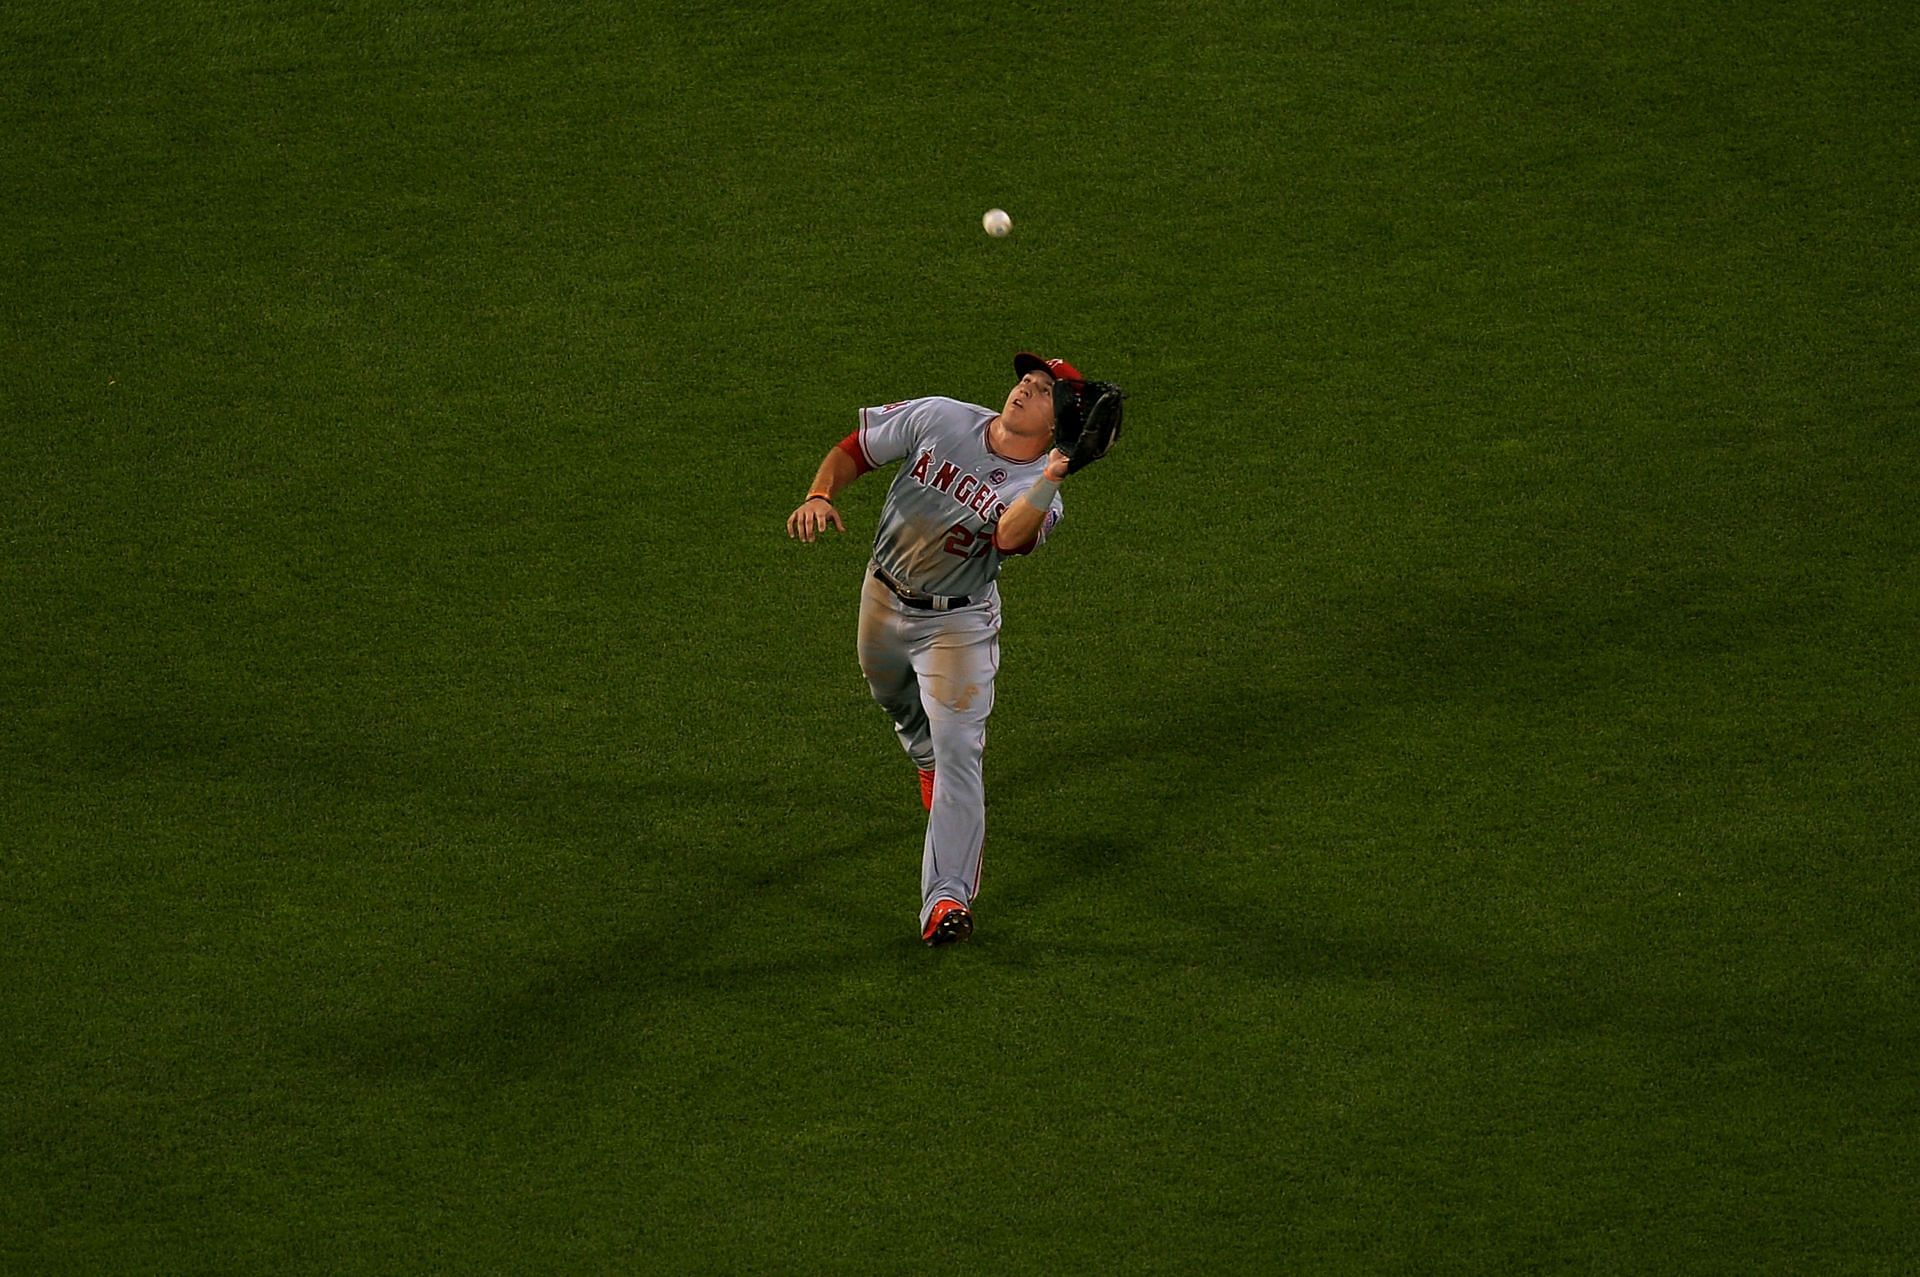 84th MLB All-Star Game Mike Trout patroling the outfield